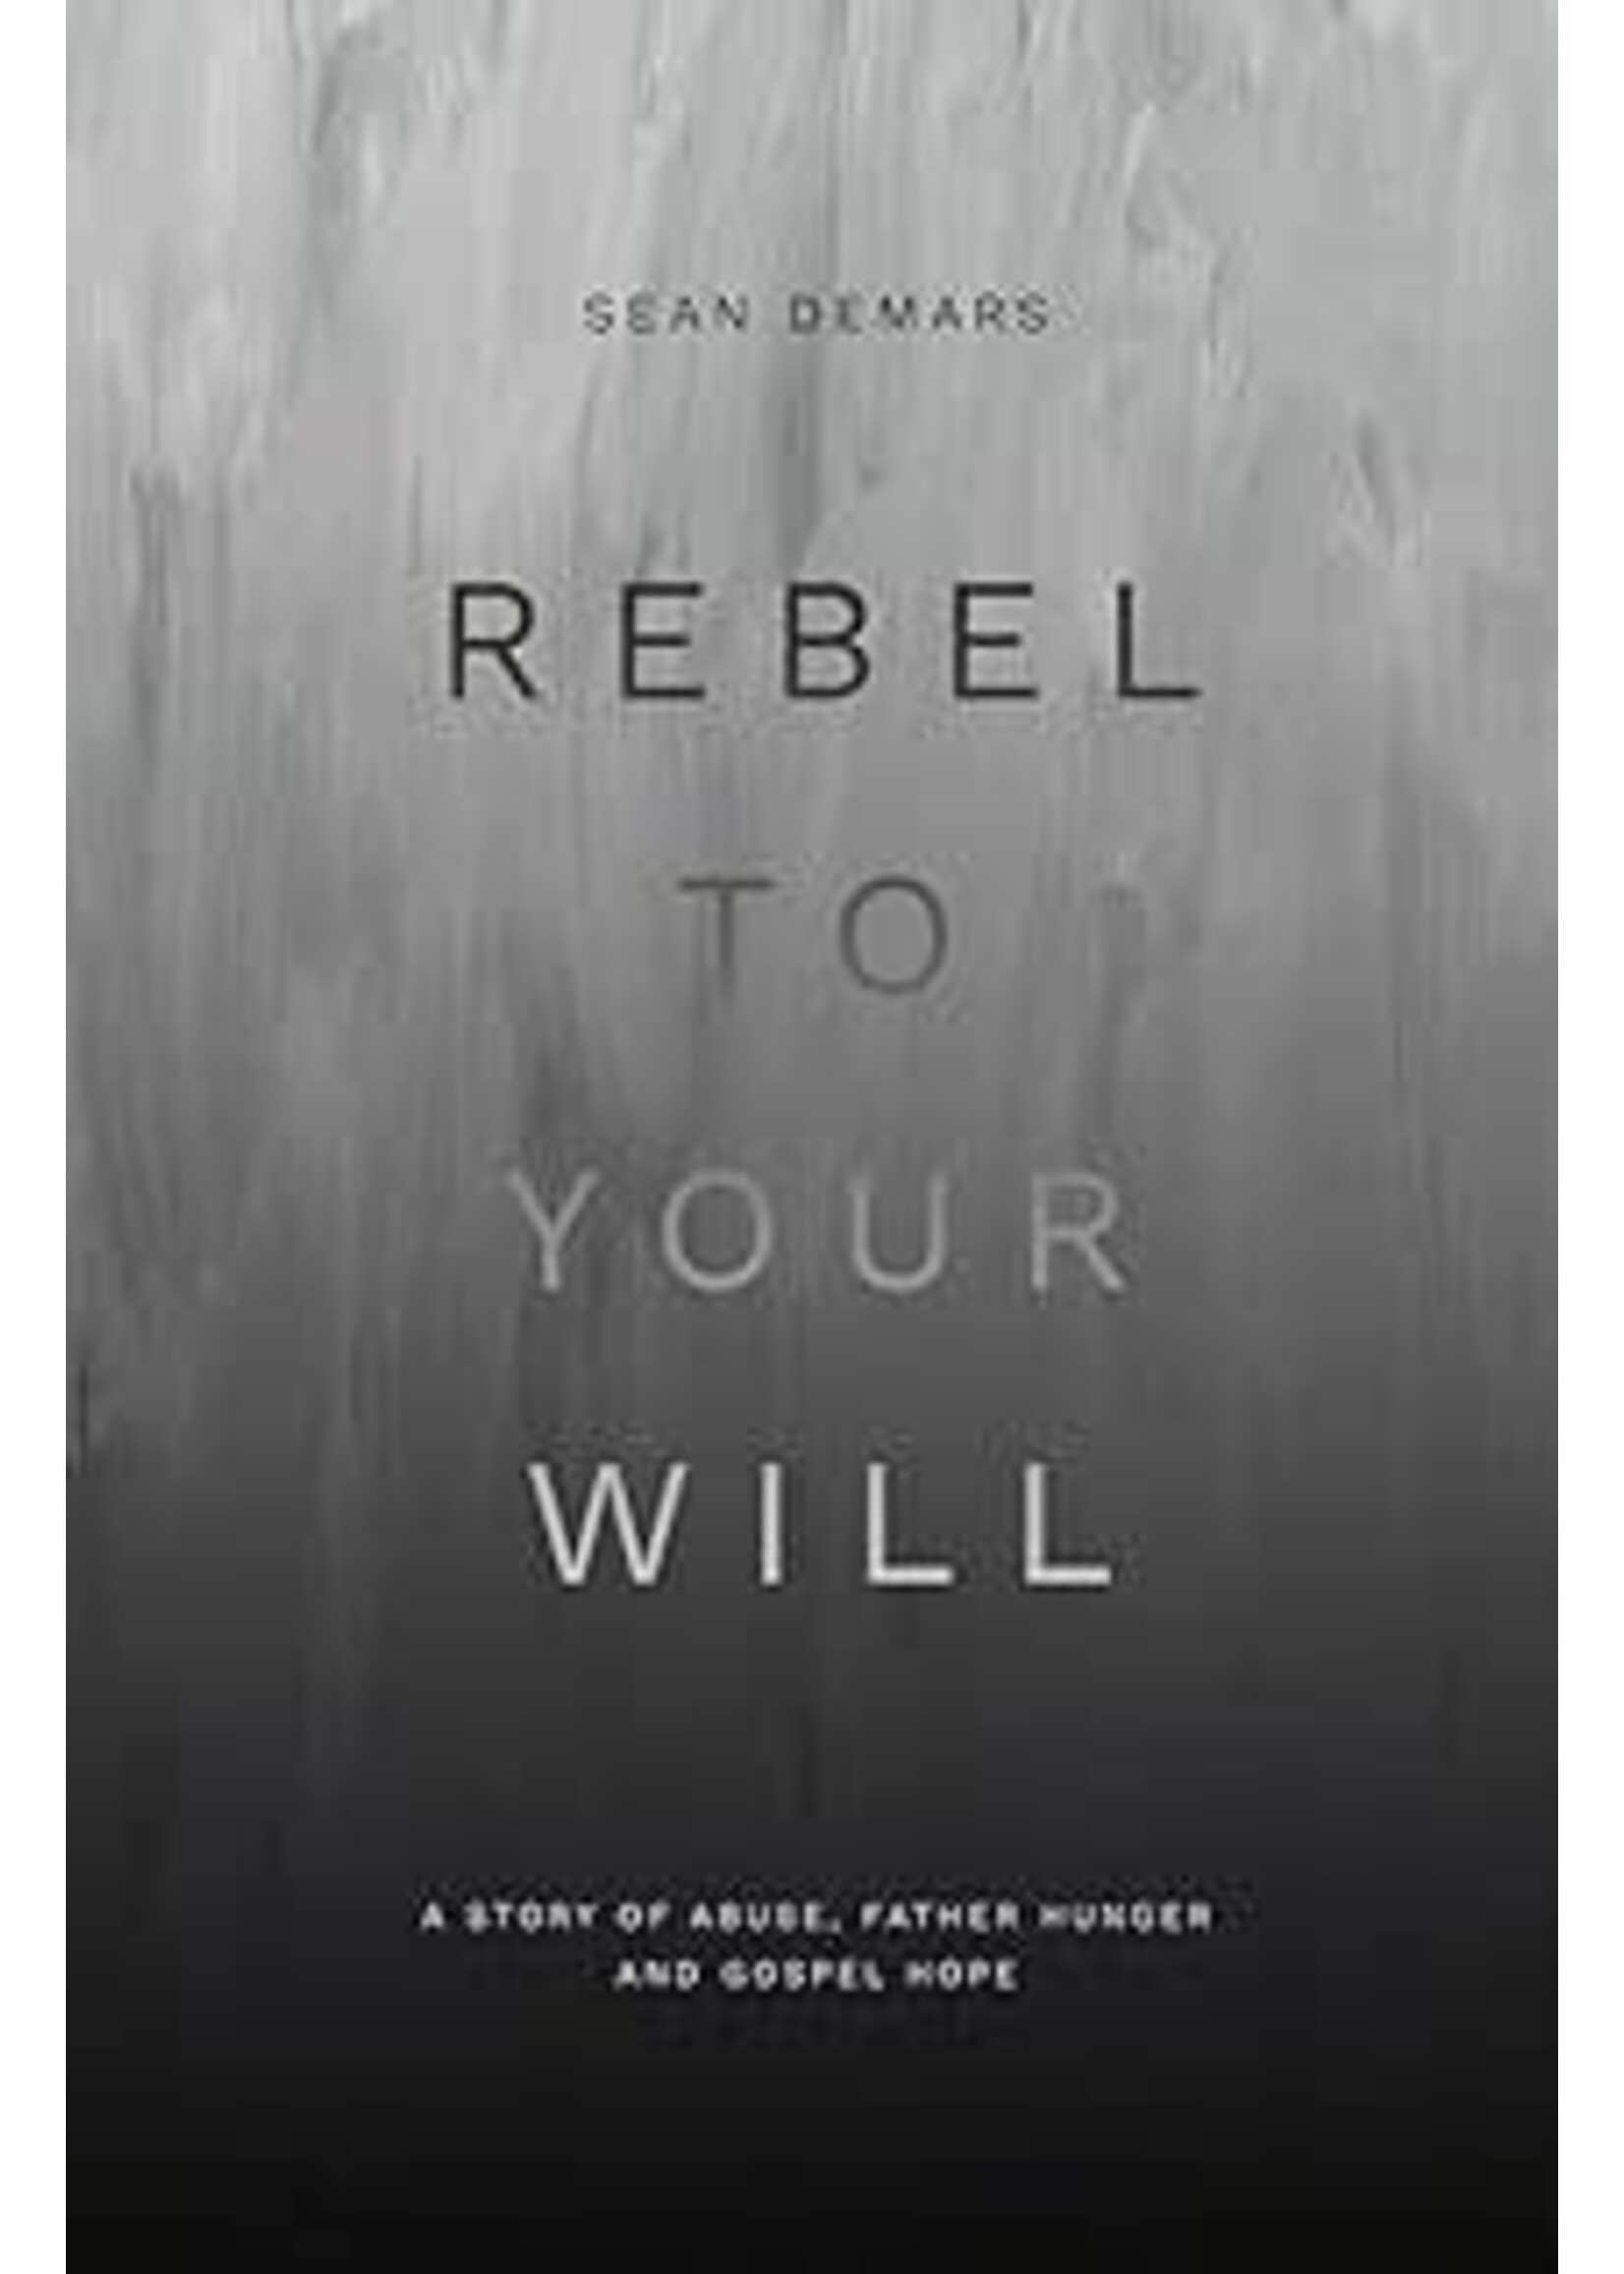 Rebel to Your Will